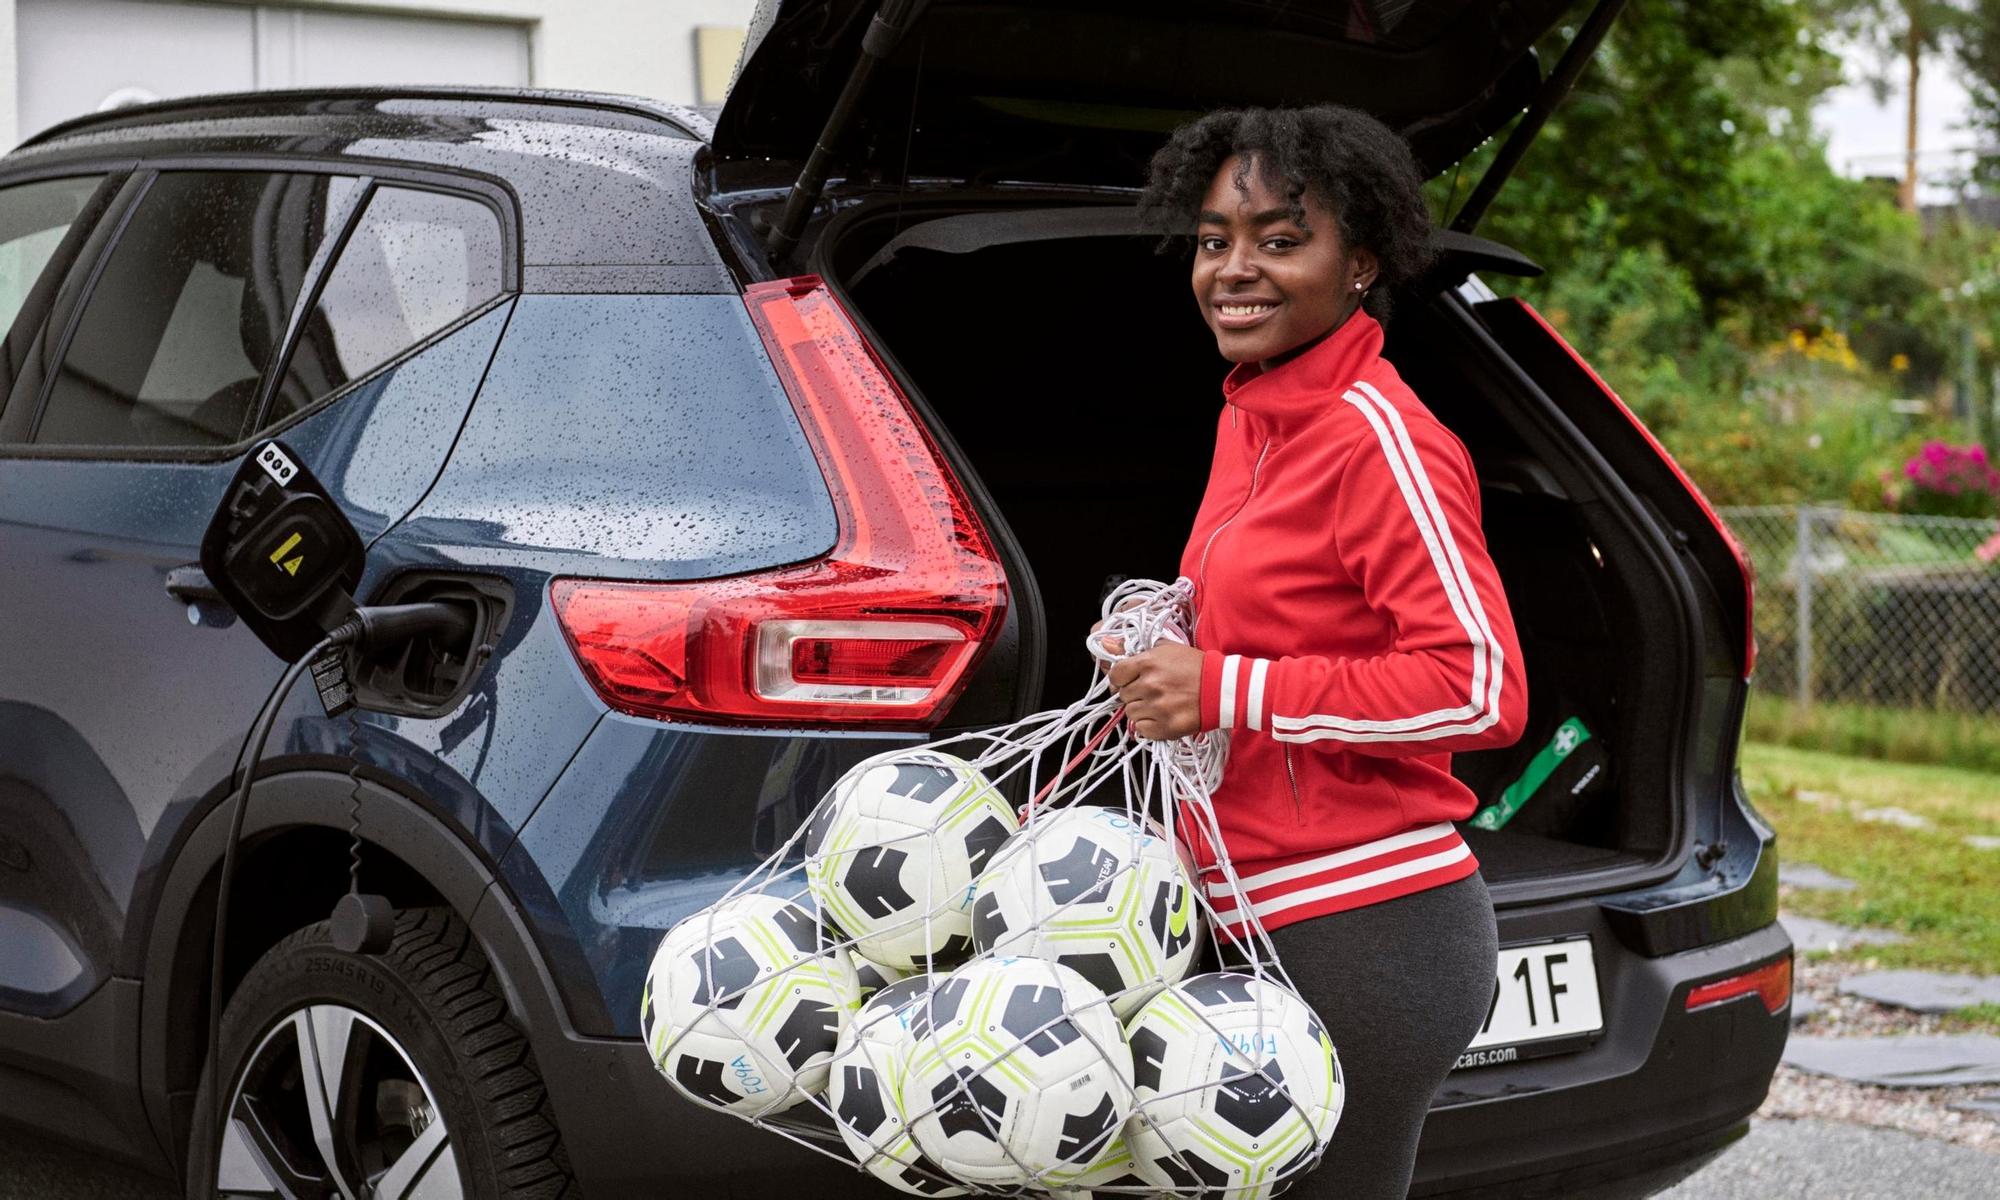 Female soccer coach packing soccer balls in the car